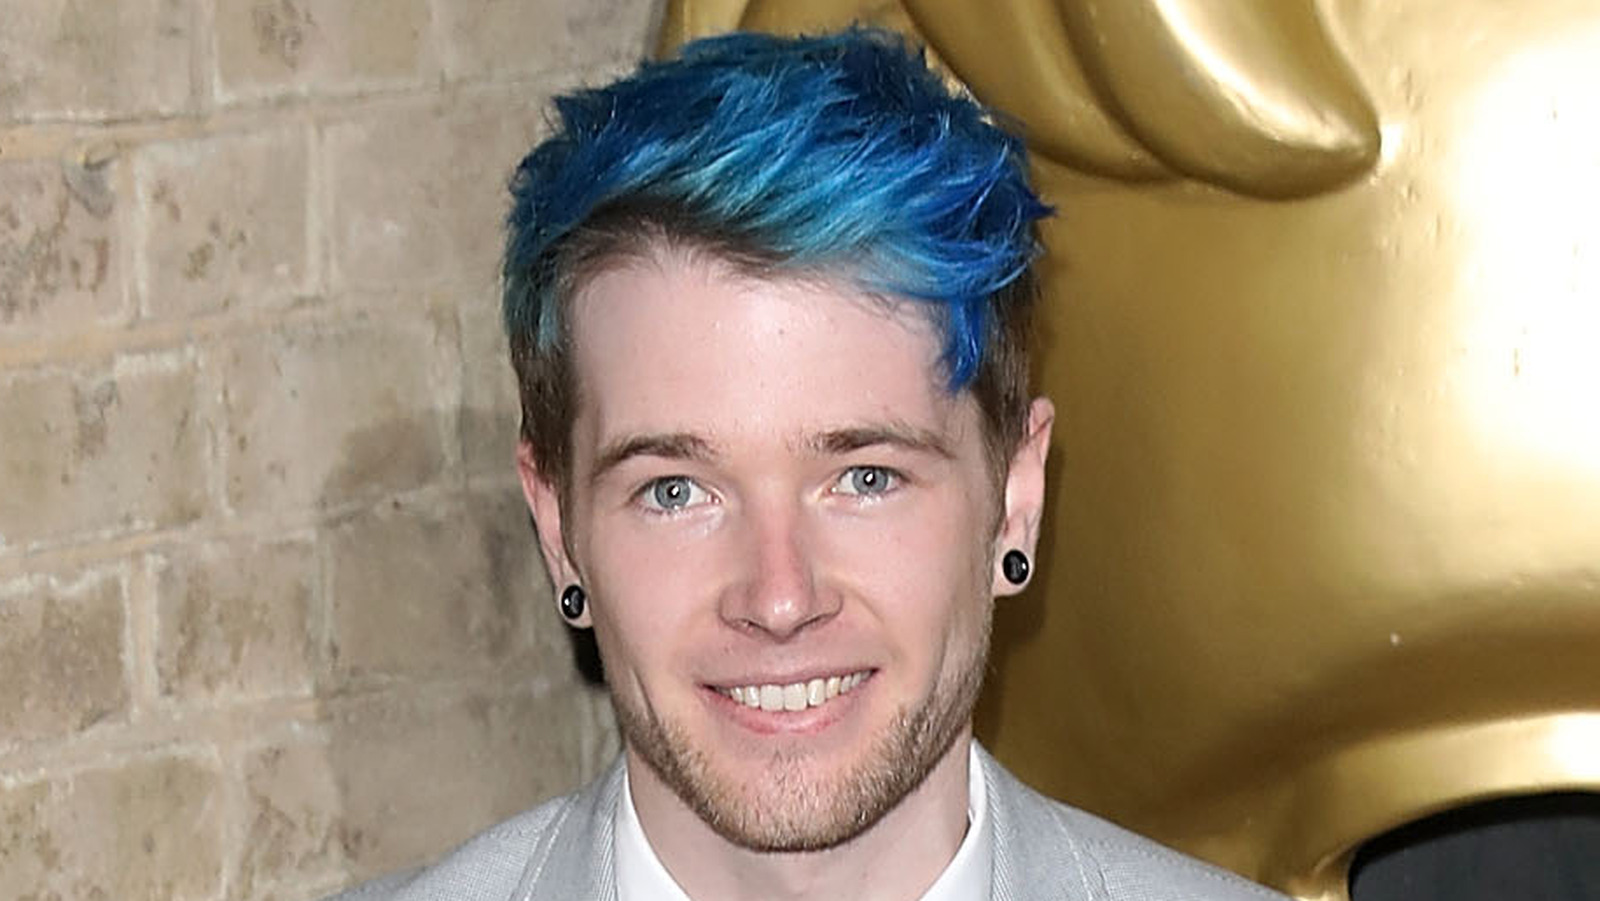 1. Dantdm's Pink and Blue Hair Transformation - wide 5